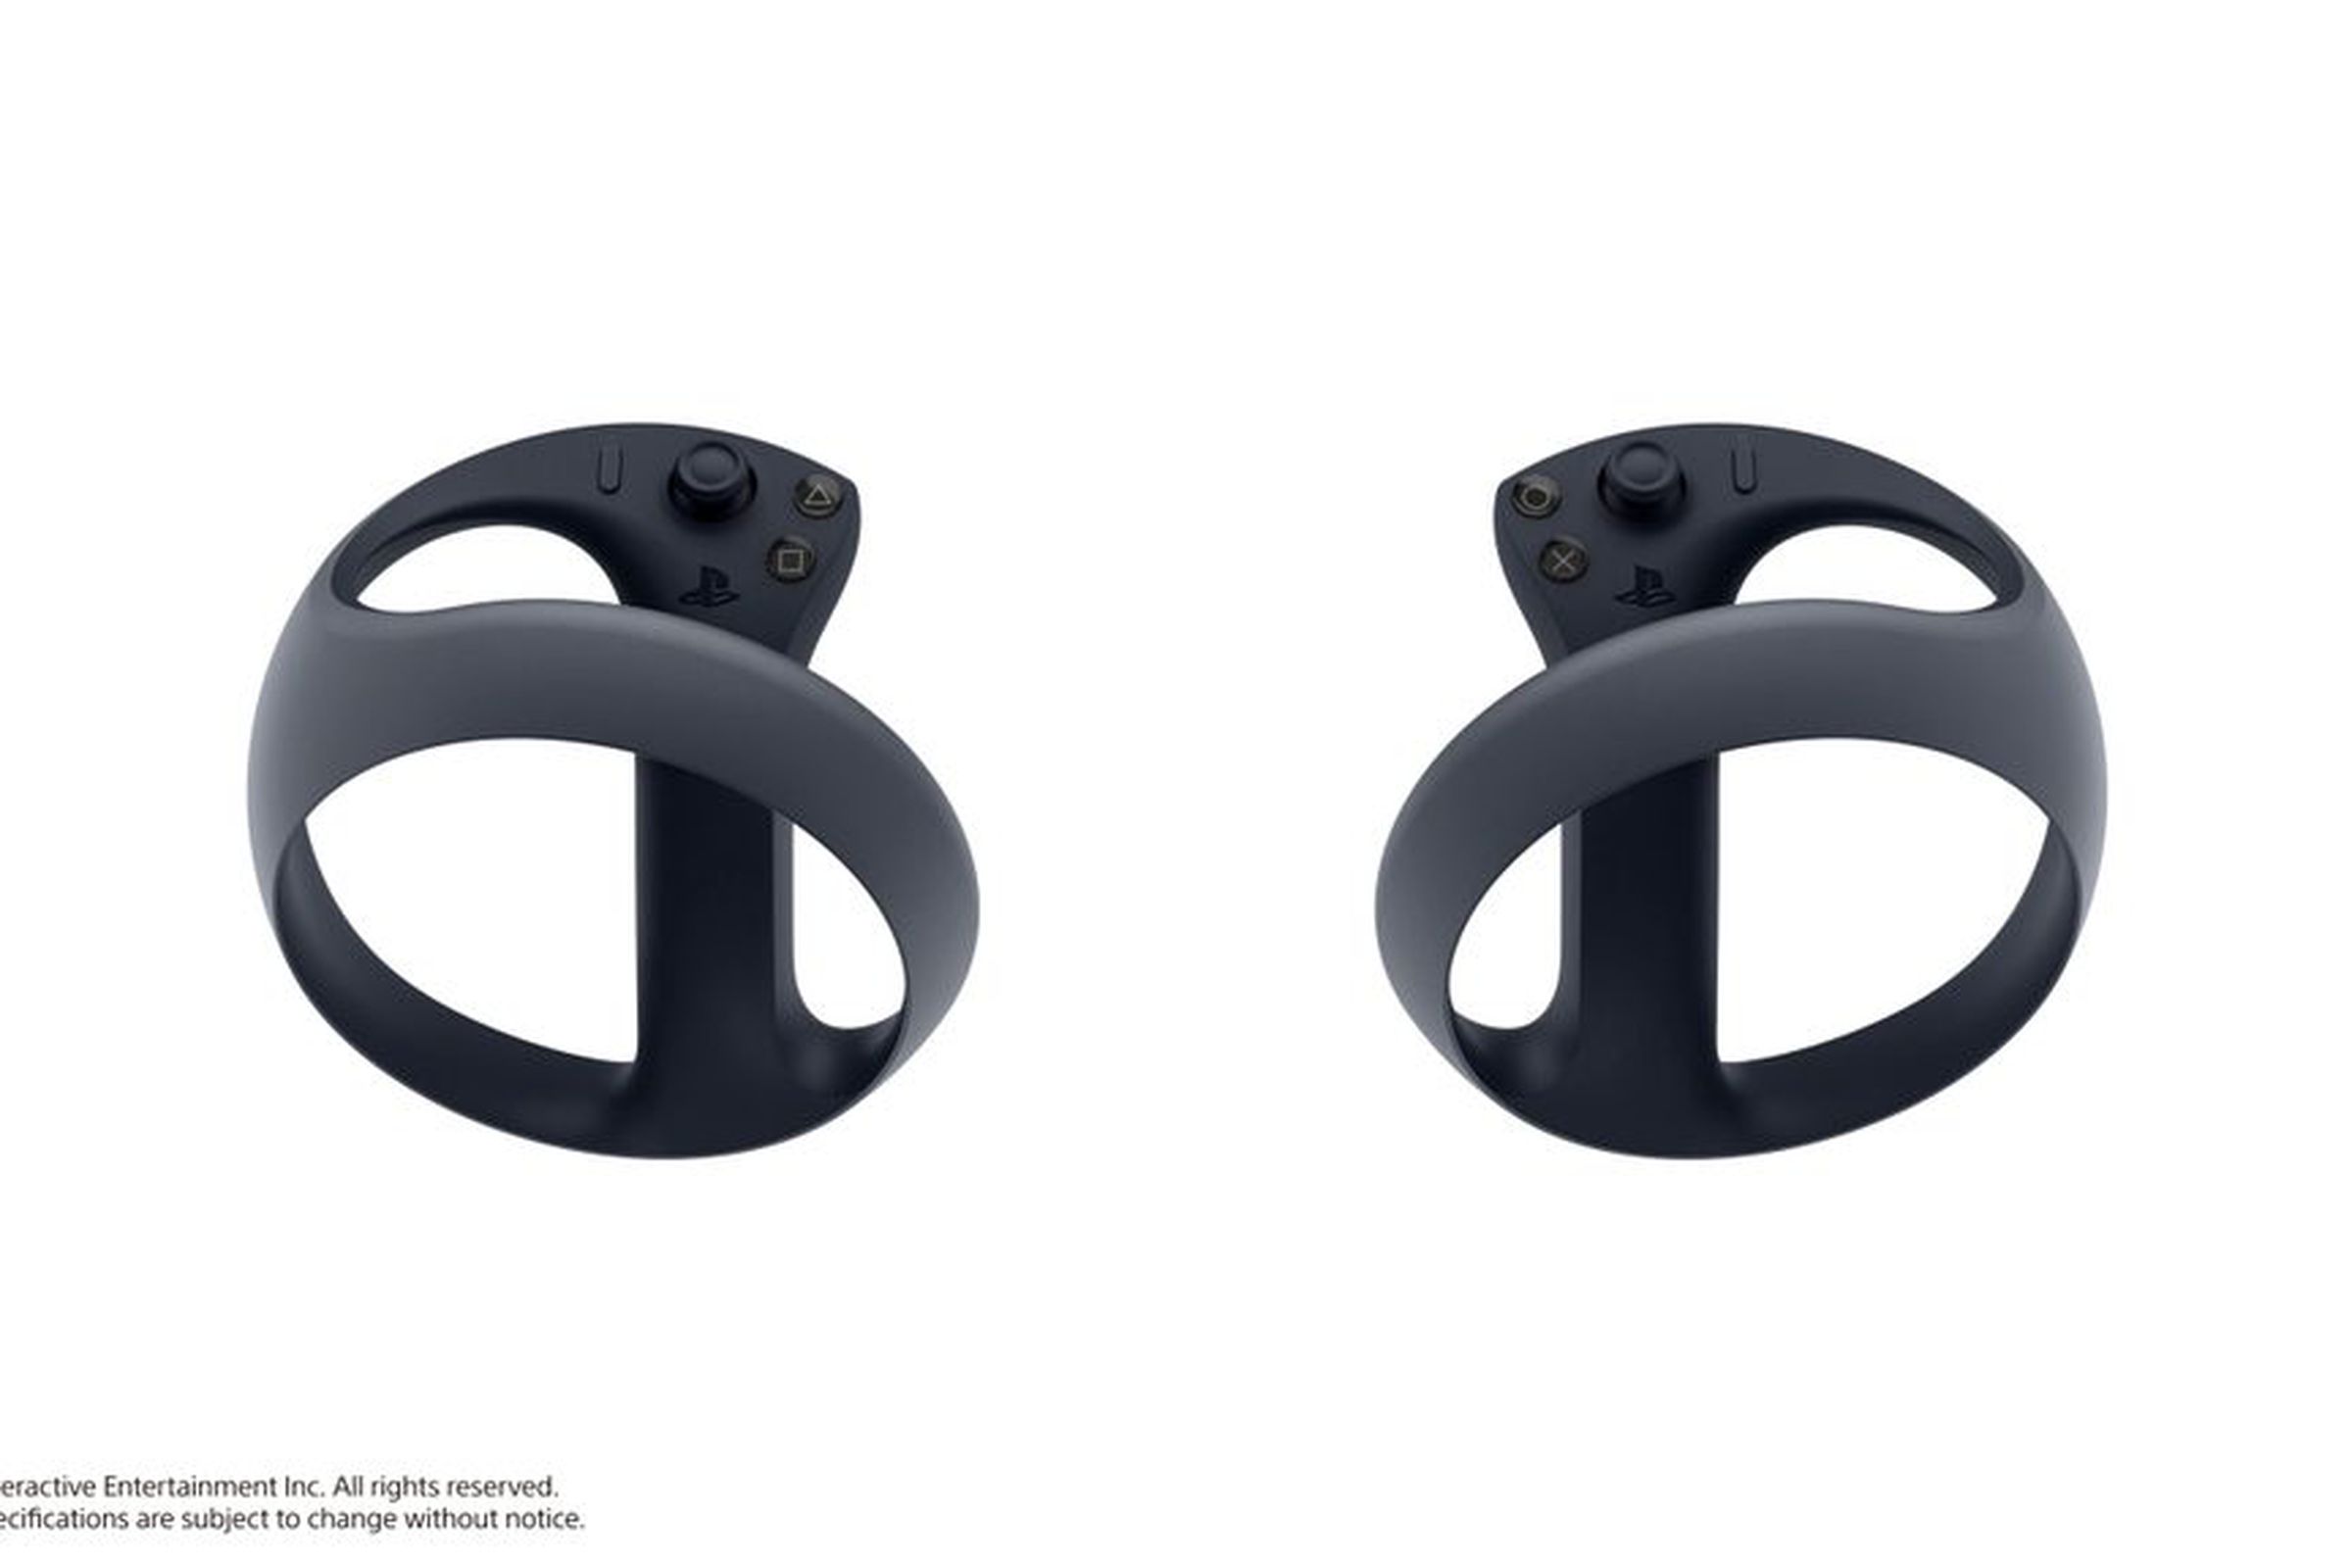 Sony’s next-gen VR controllers.